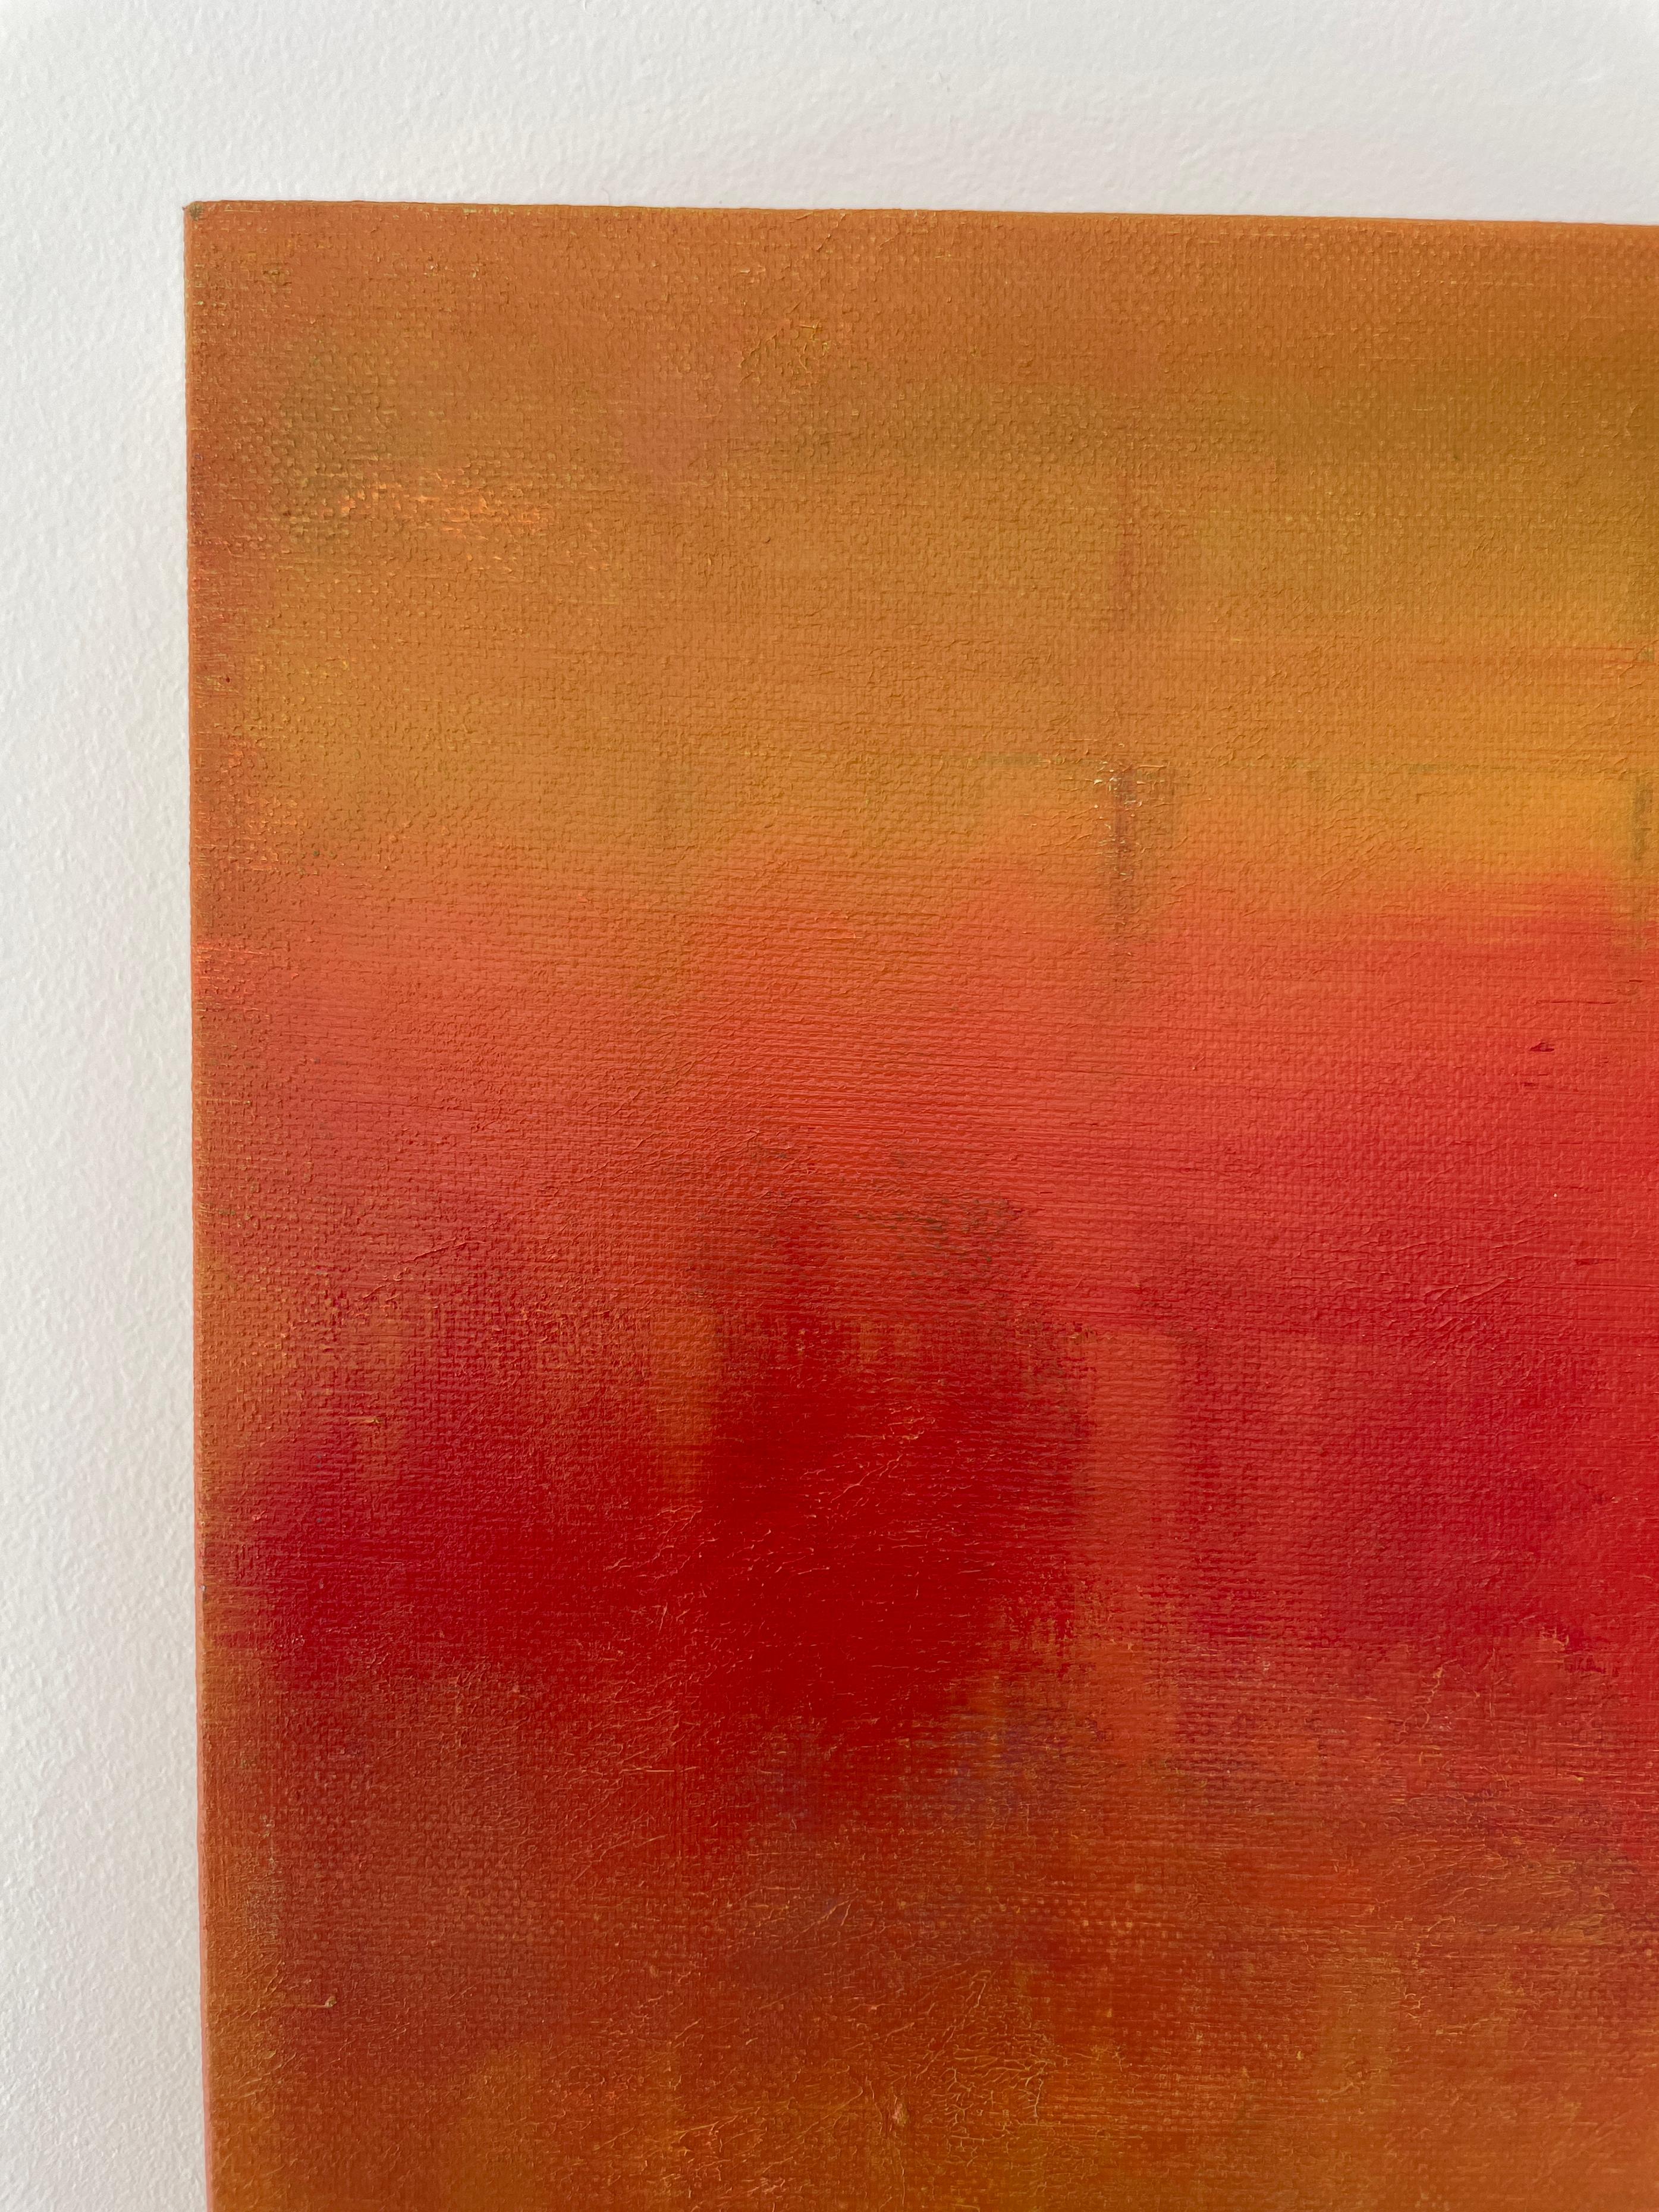 Rising sun - acrylic on canvas - Brown Abstract Painting by Nina Weintraub